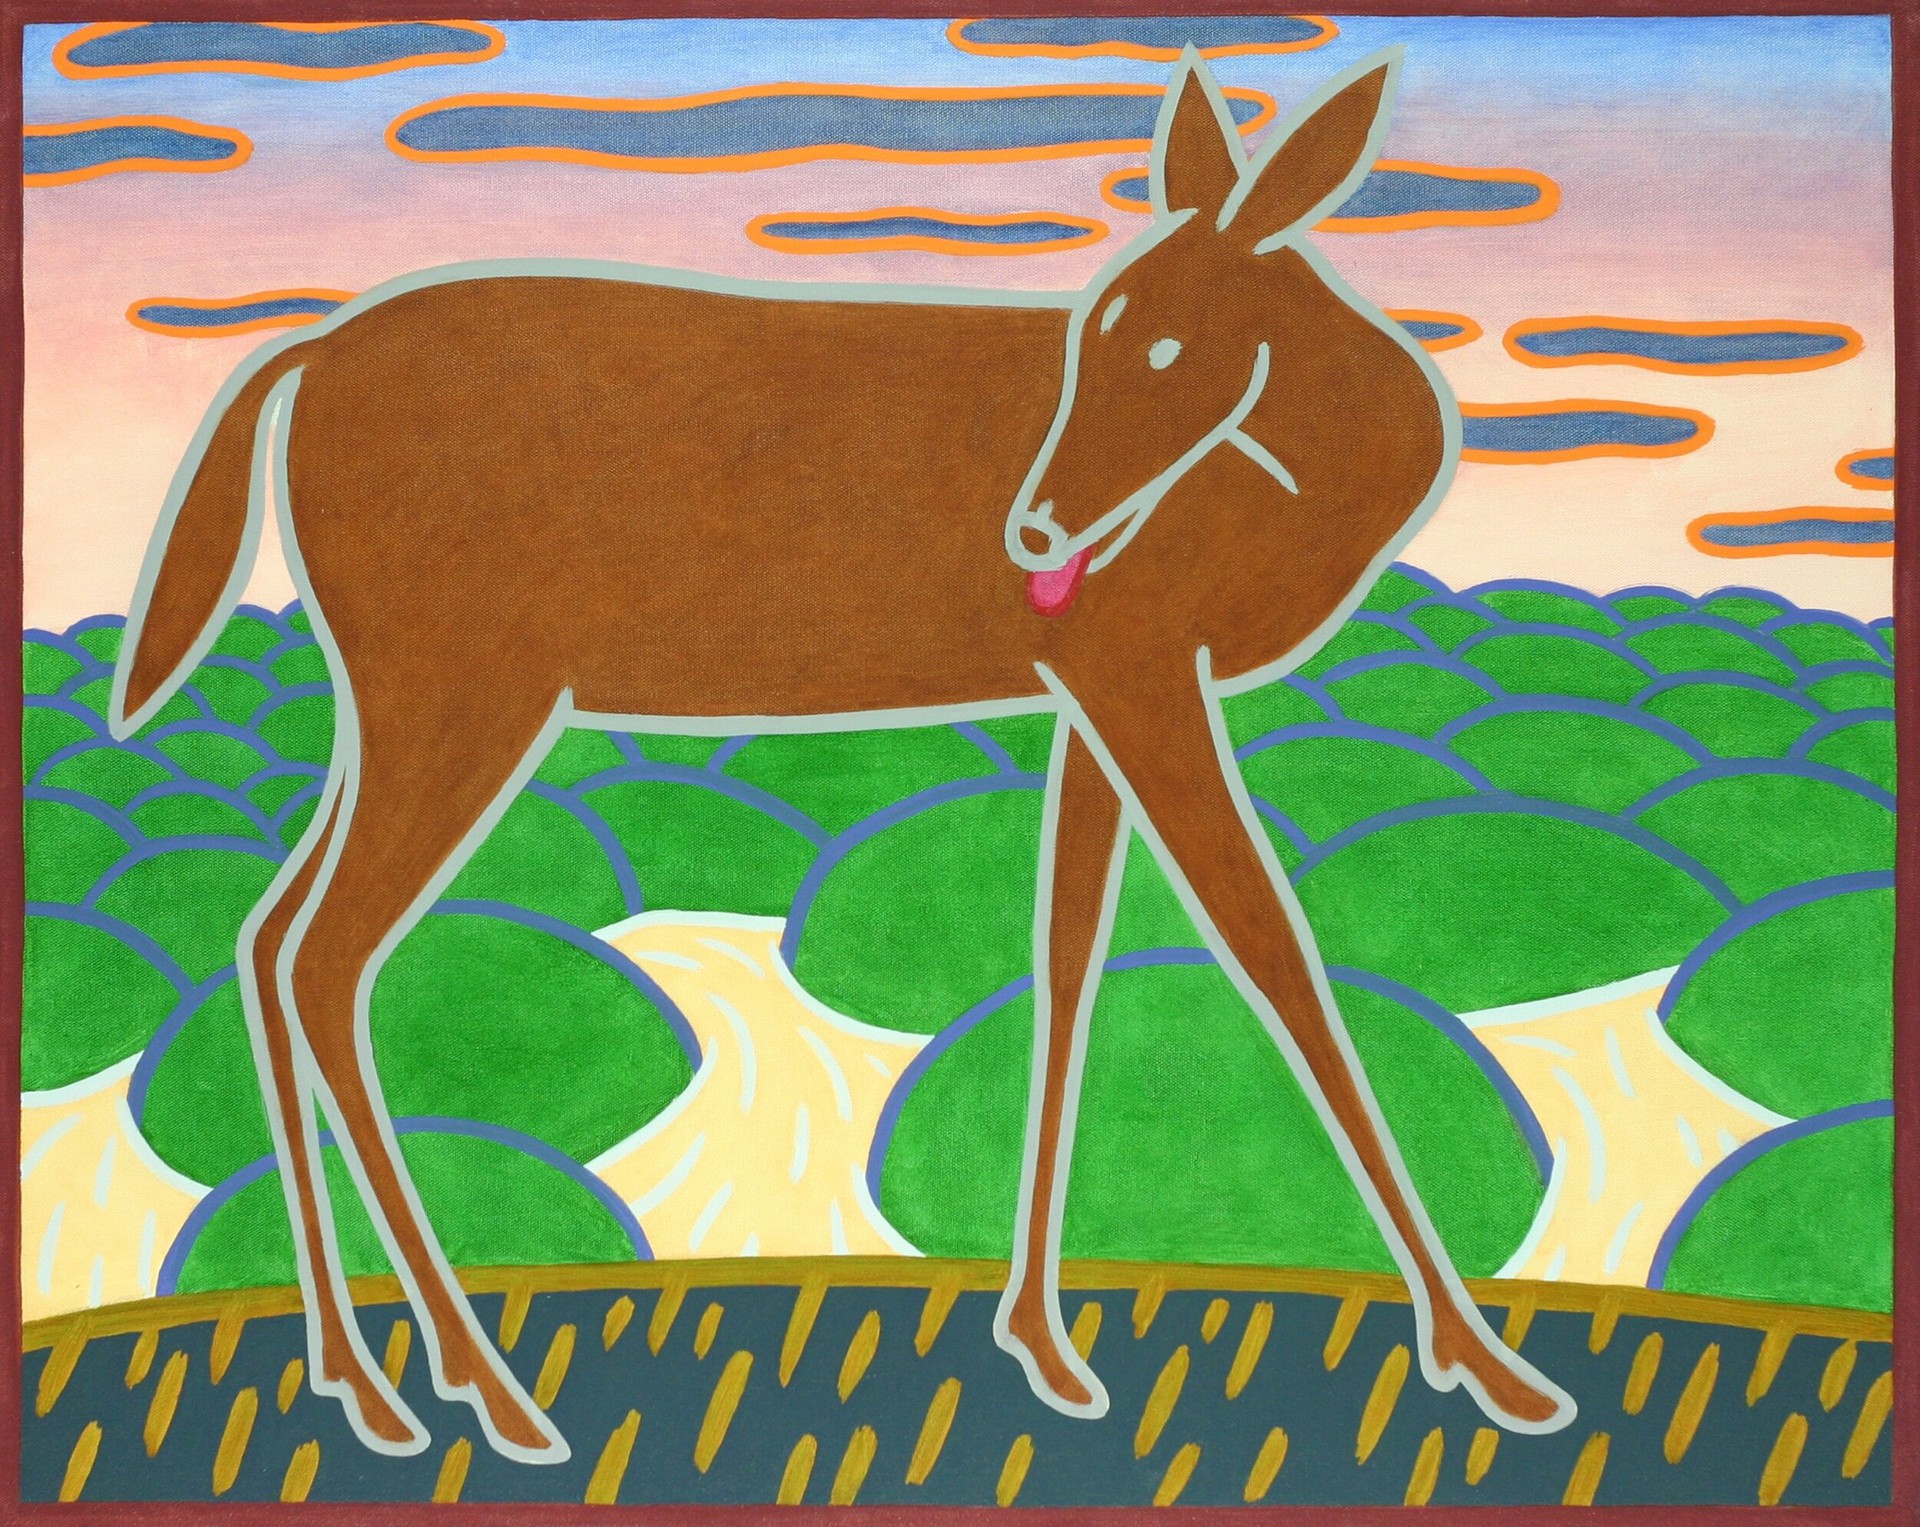 Deer on a Hill by Charles Munch